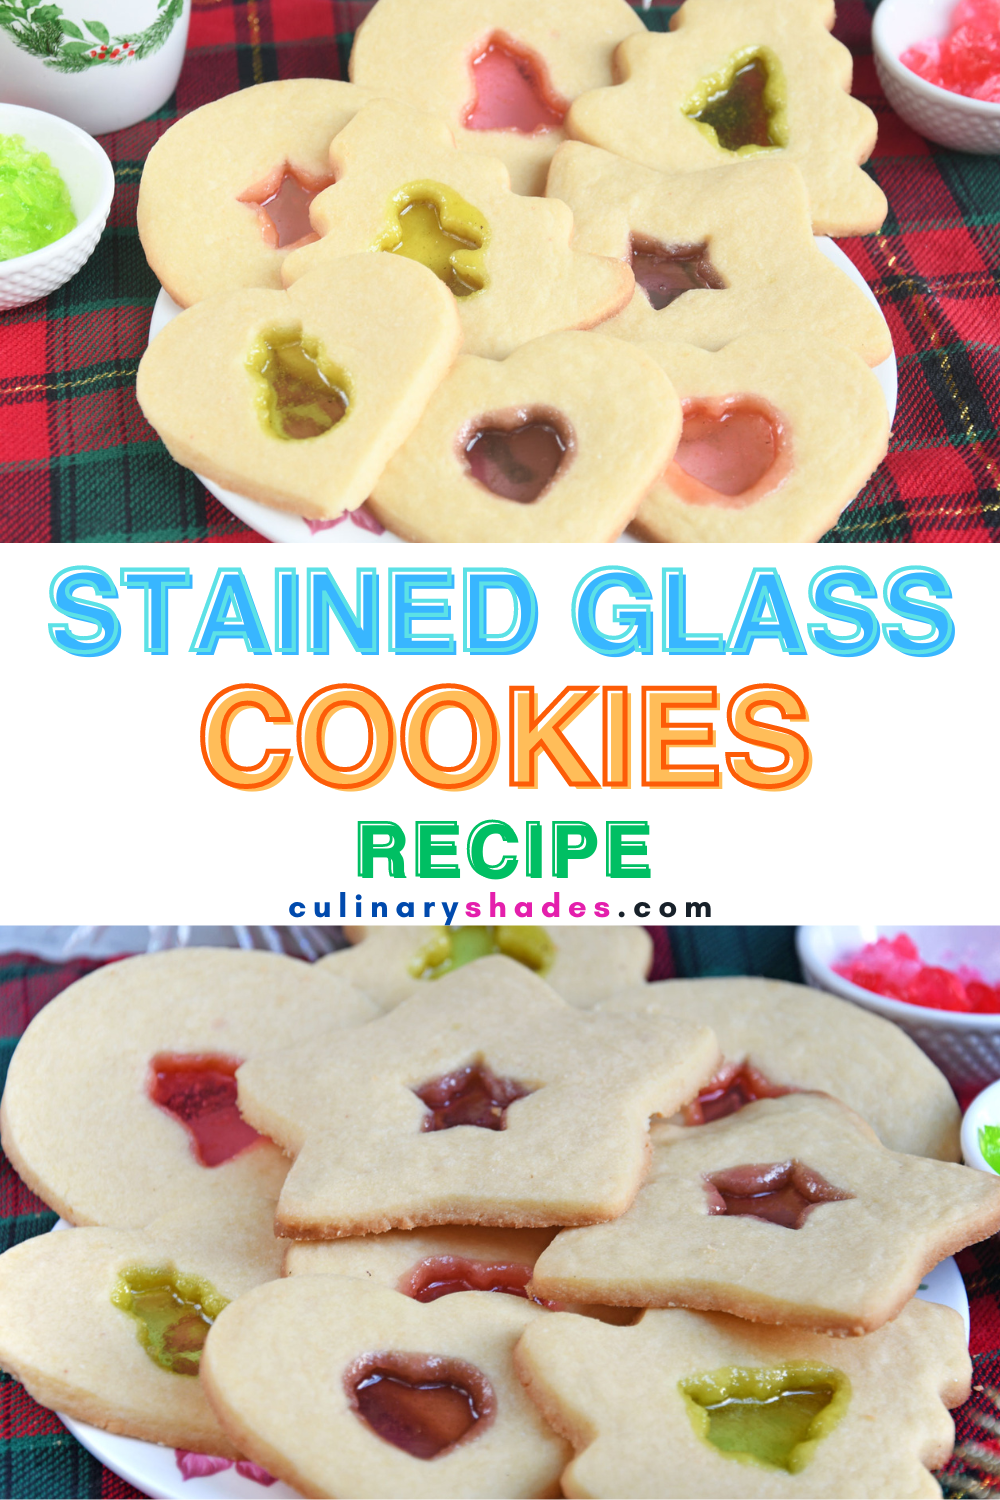 Stained glass cookies.